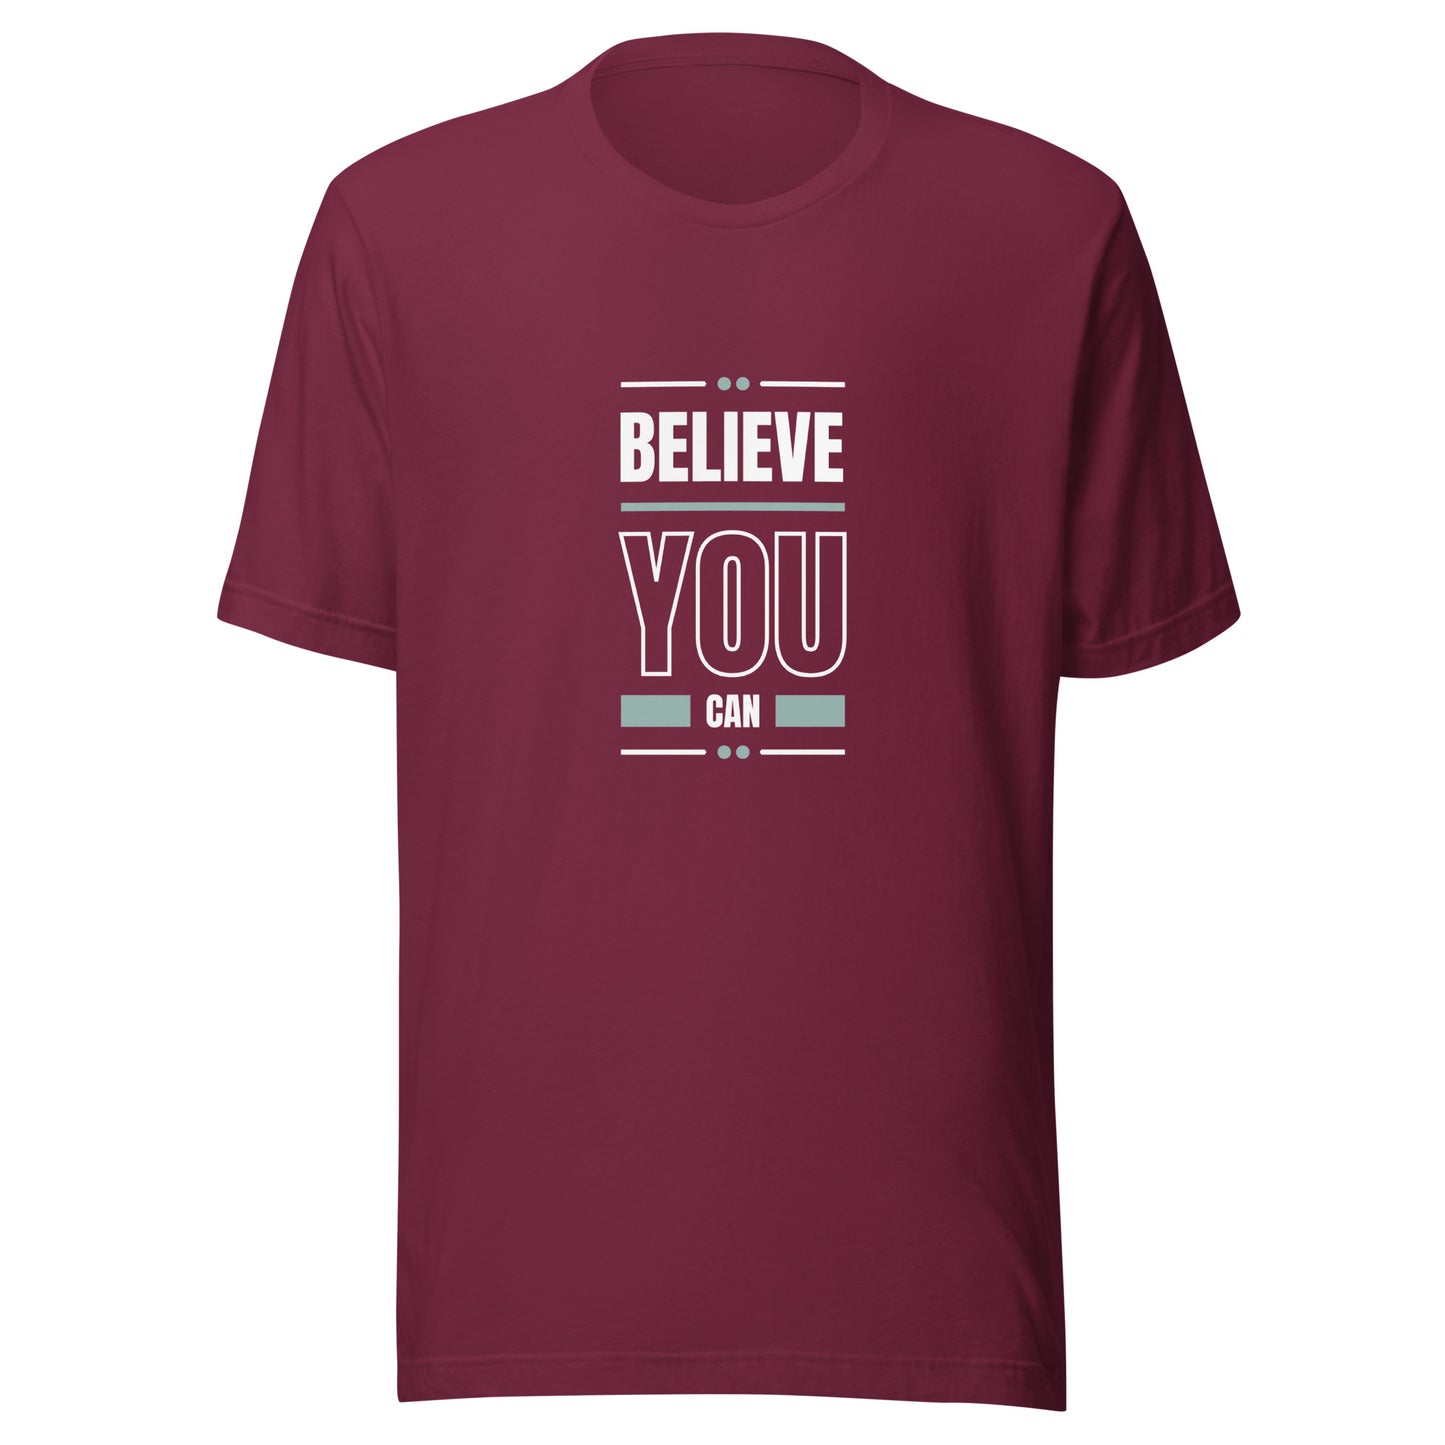 Mens Believe You Can t-shirt